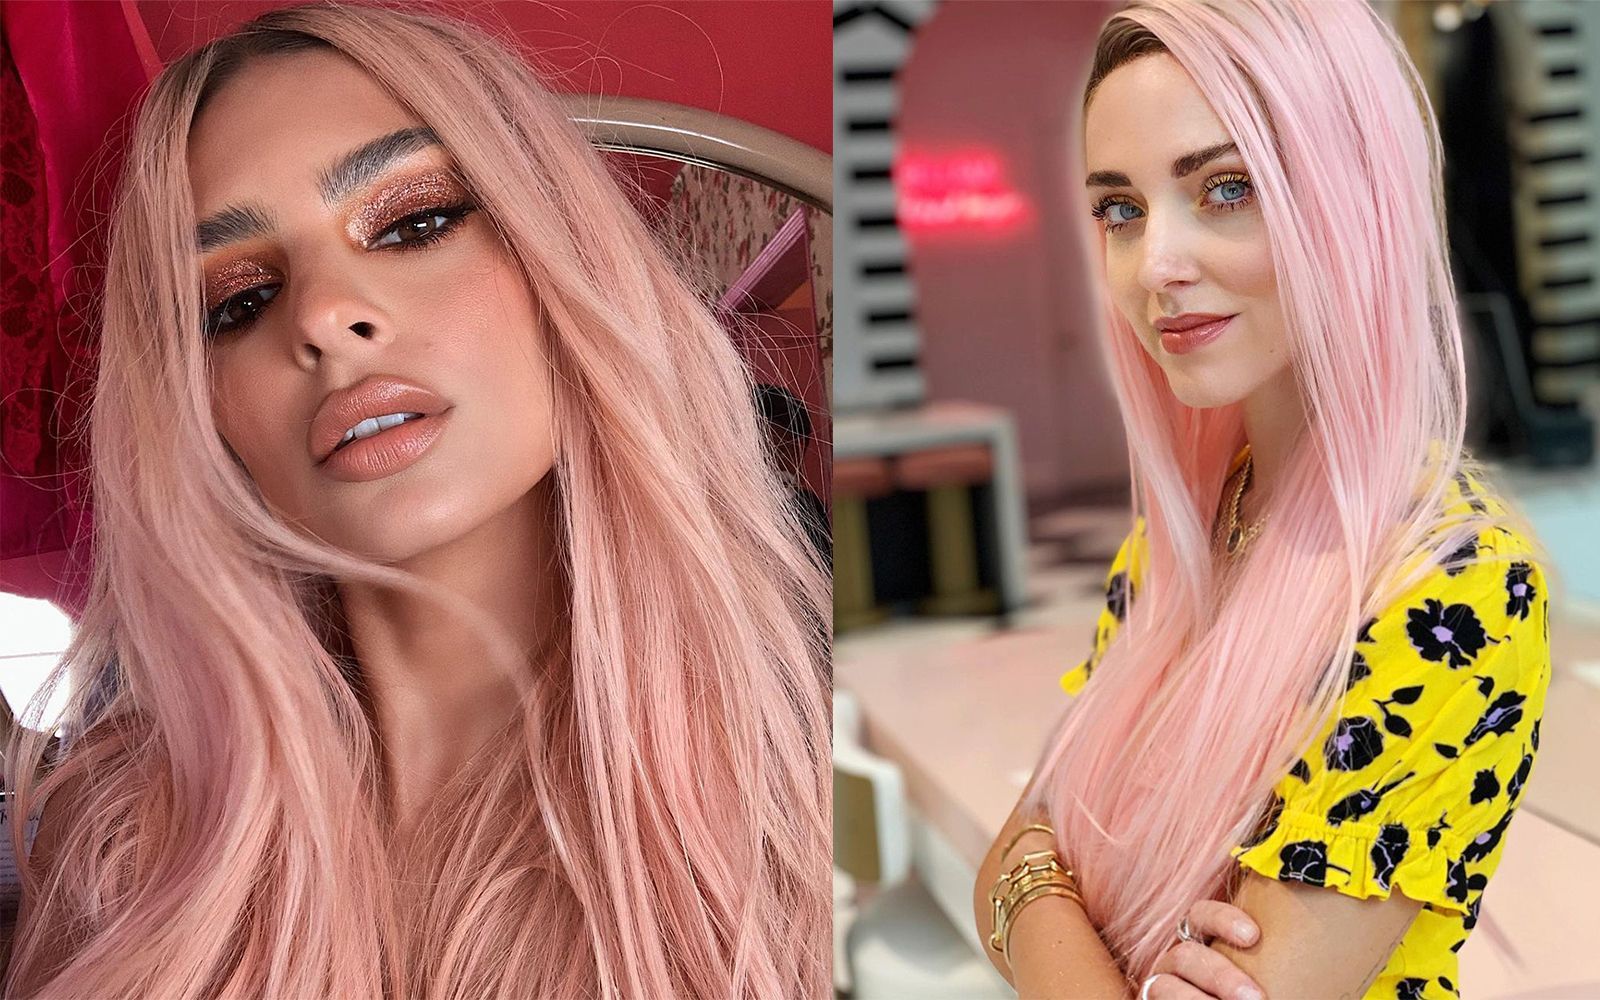 Pink hair: Instagram filters or reality?